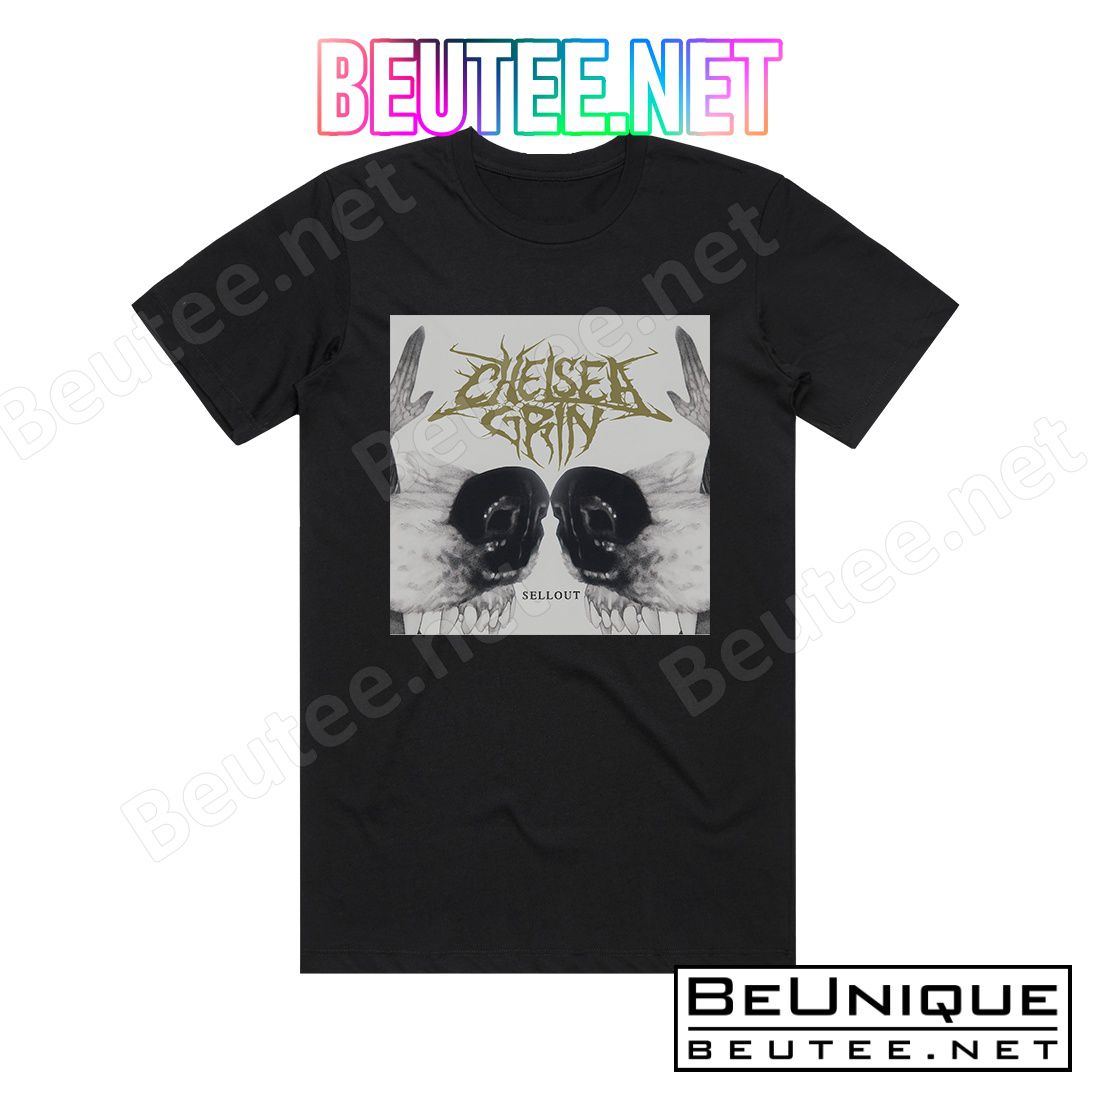 Chelsea Grin Sellout Album Cover T-Shirt